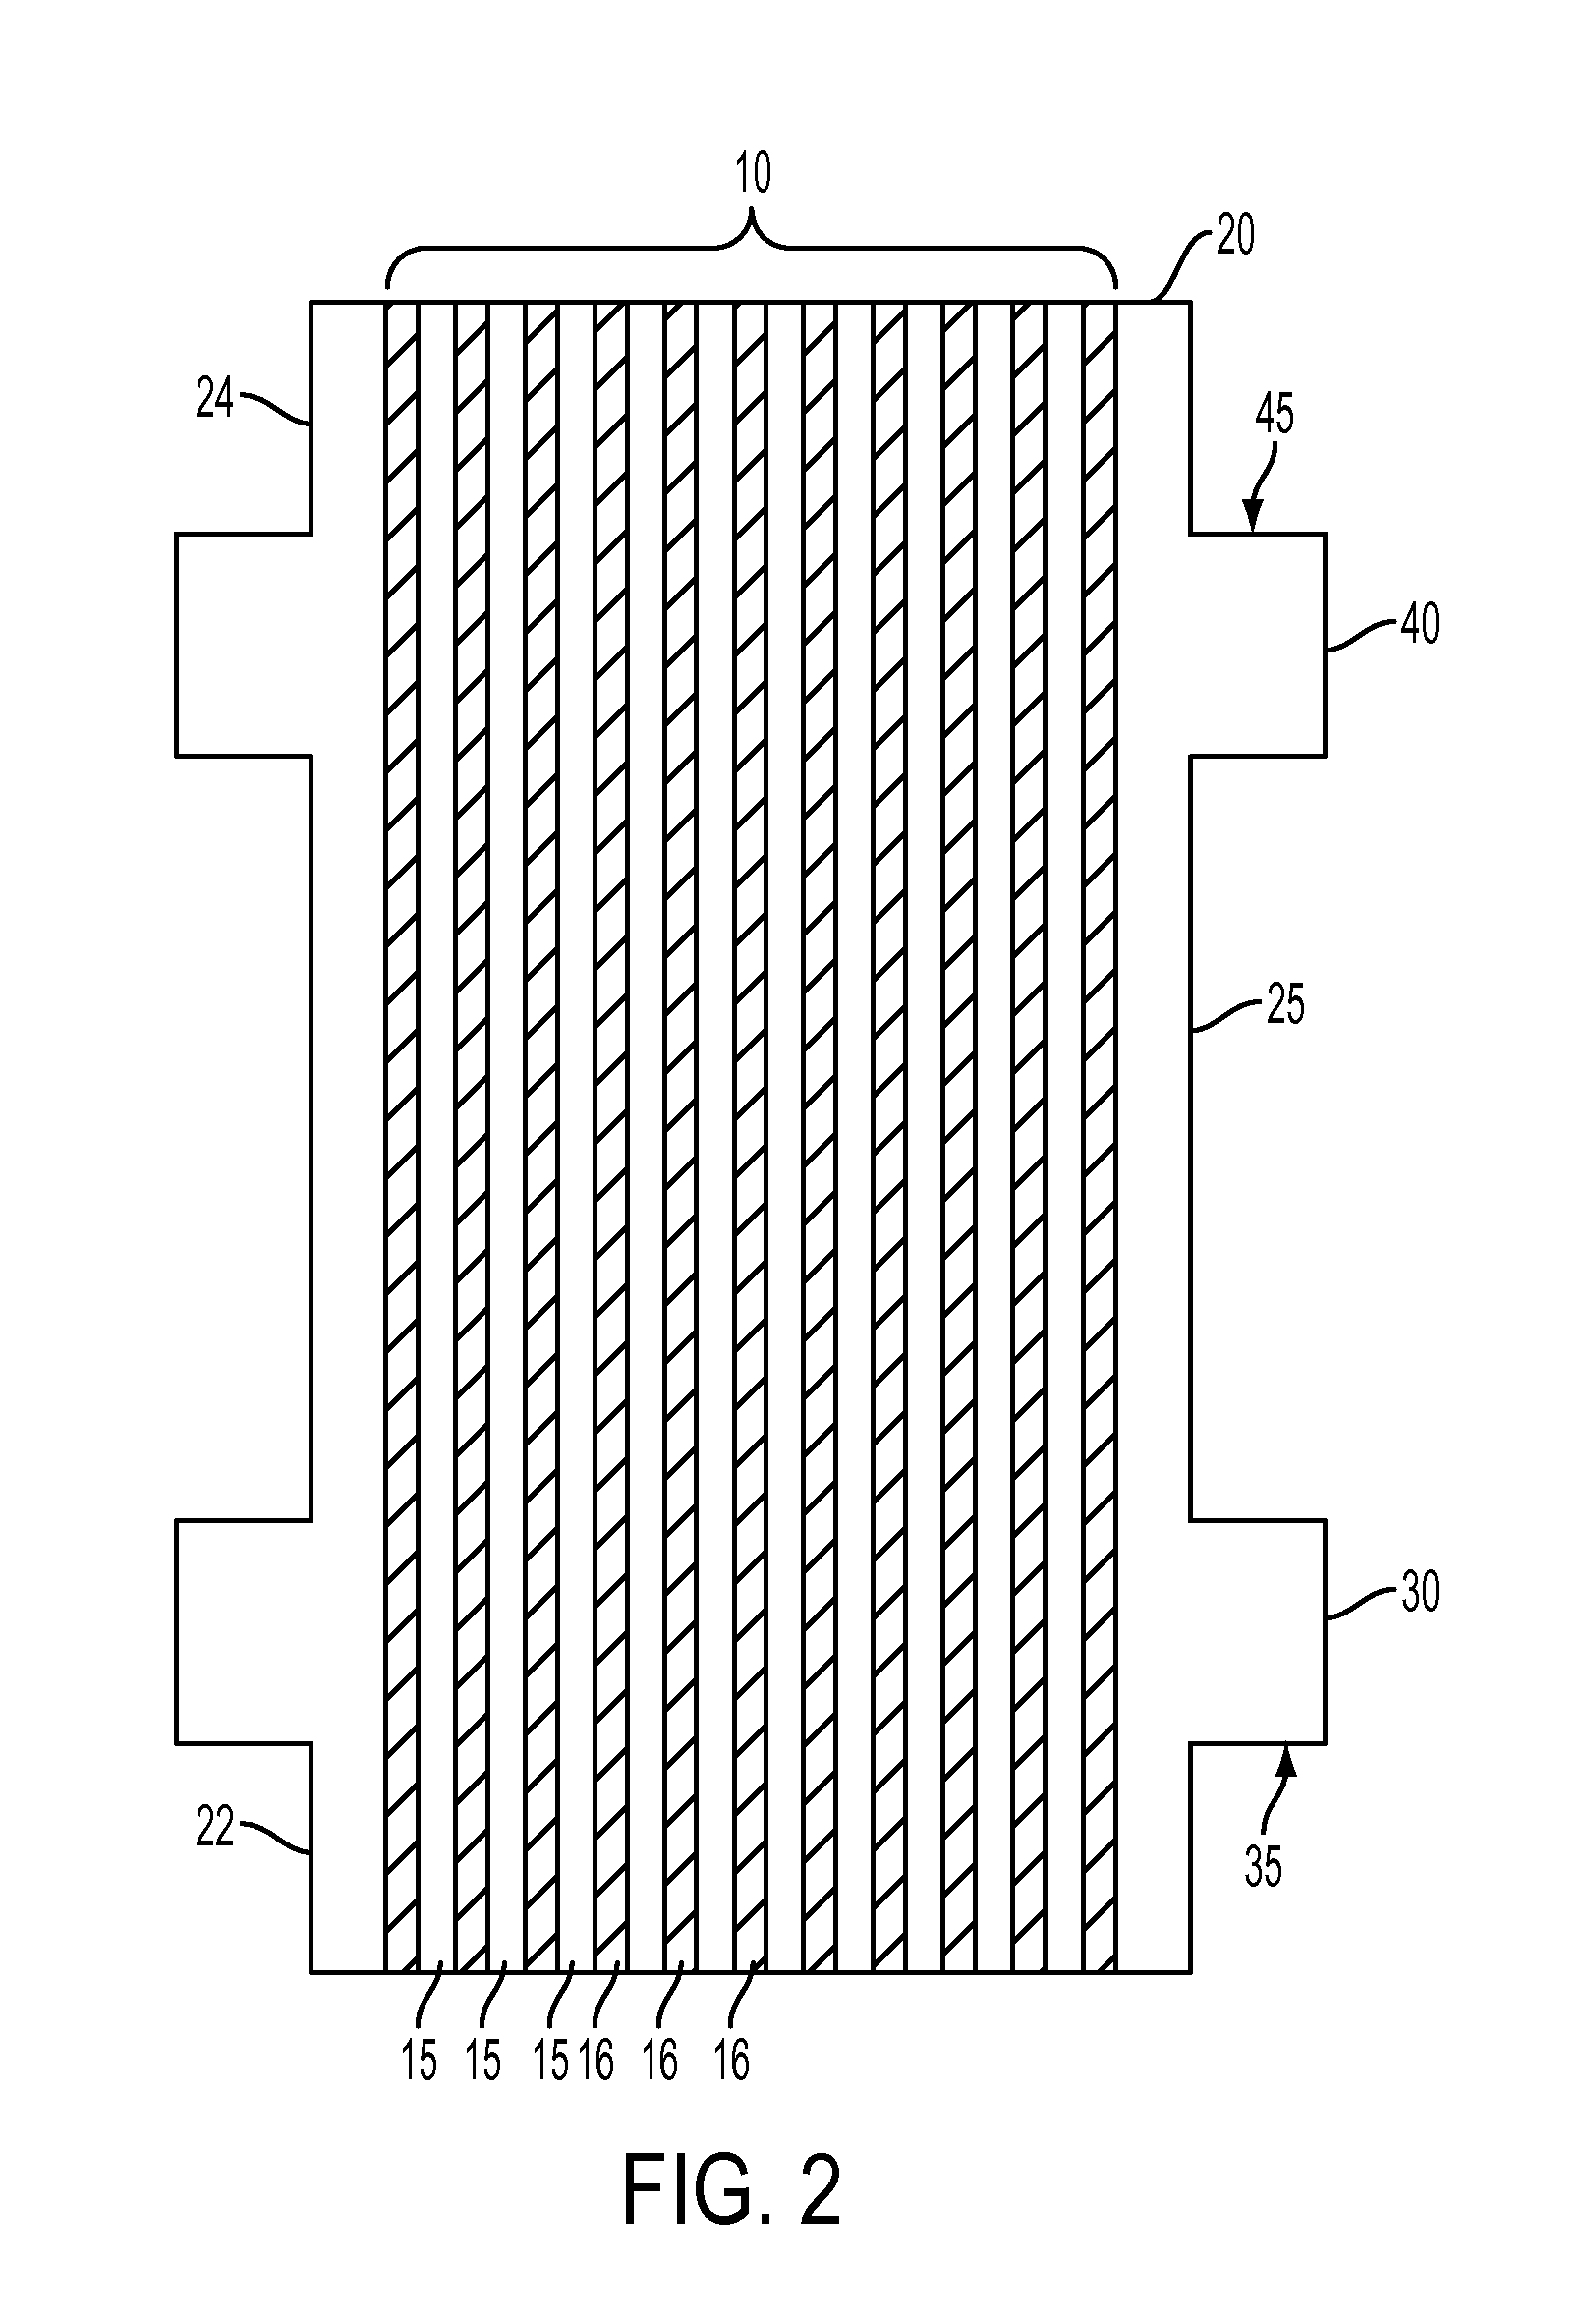 Coating apparatus and method for forming a coating layer on monolith substrates